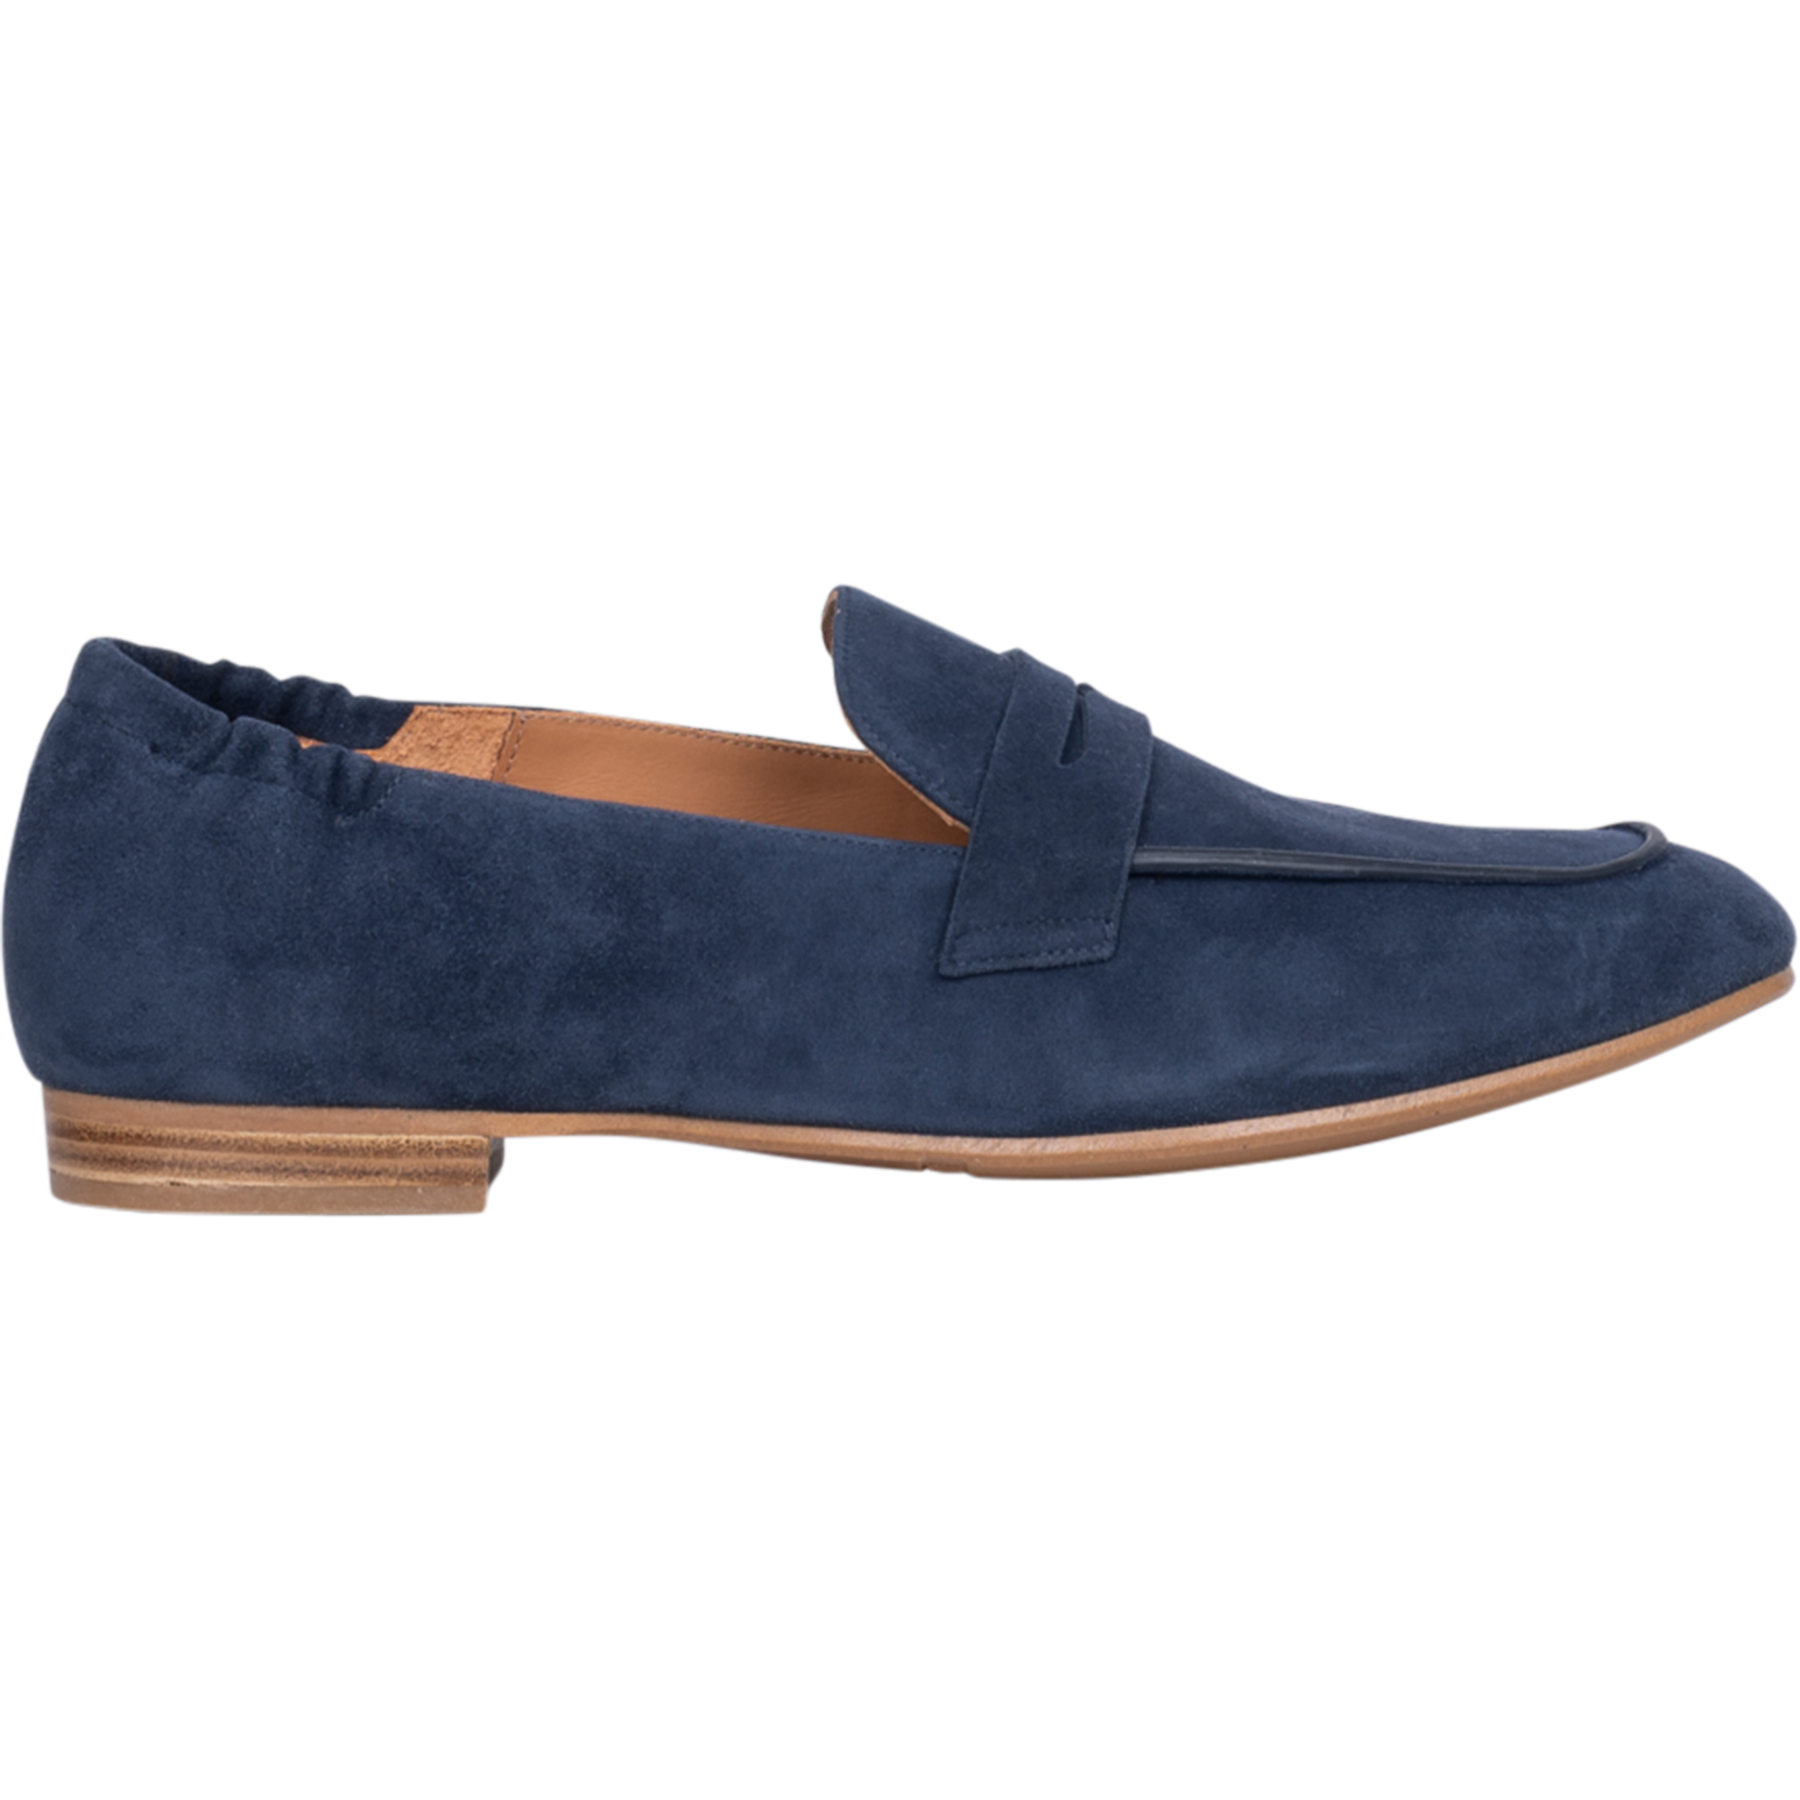 A11919 - Navy Suede/Light Sole